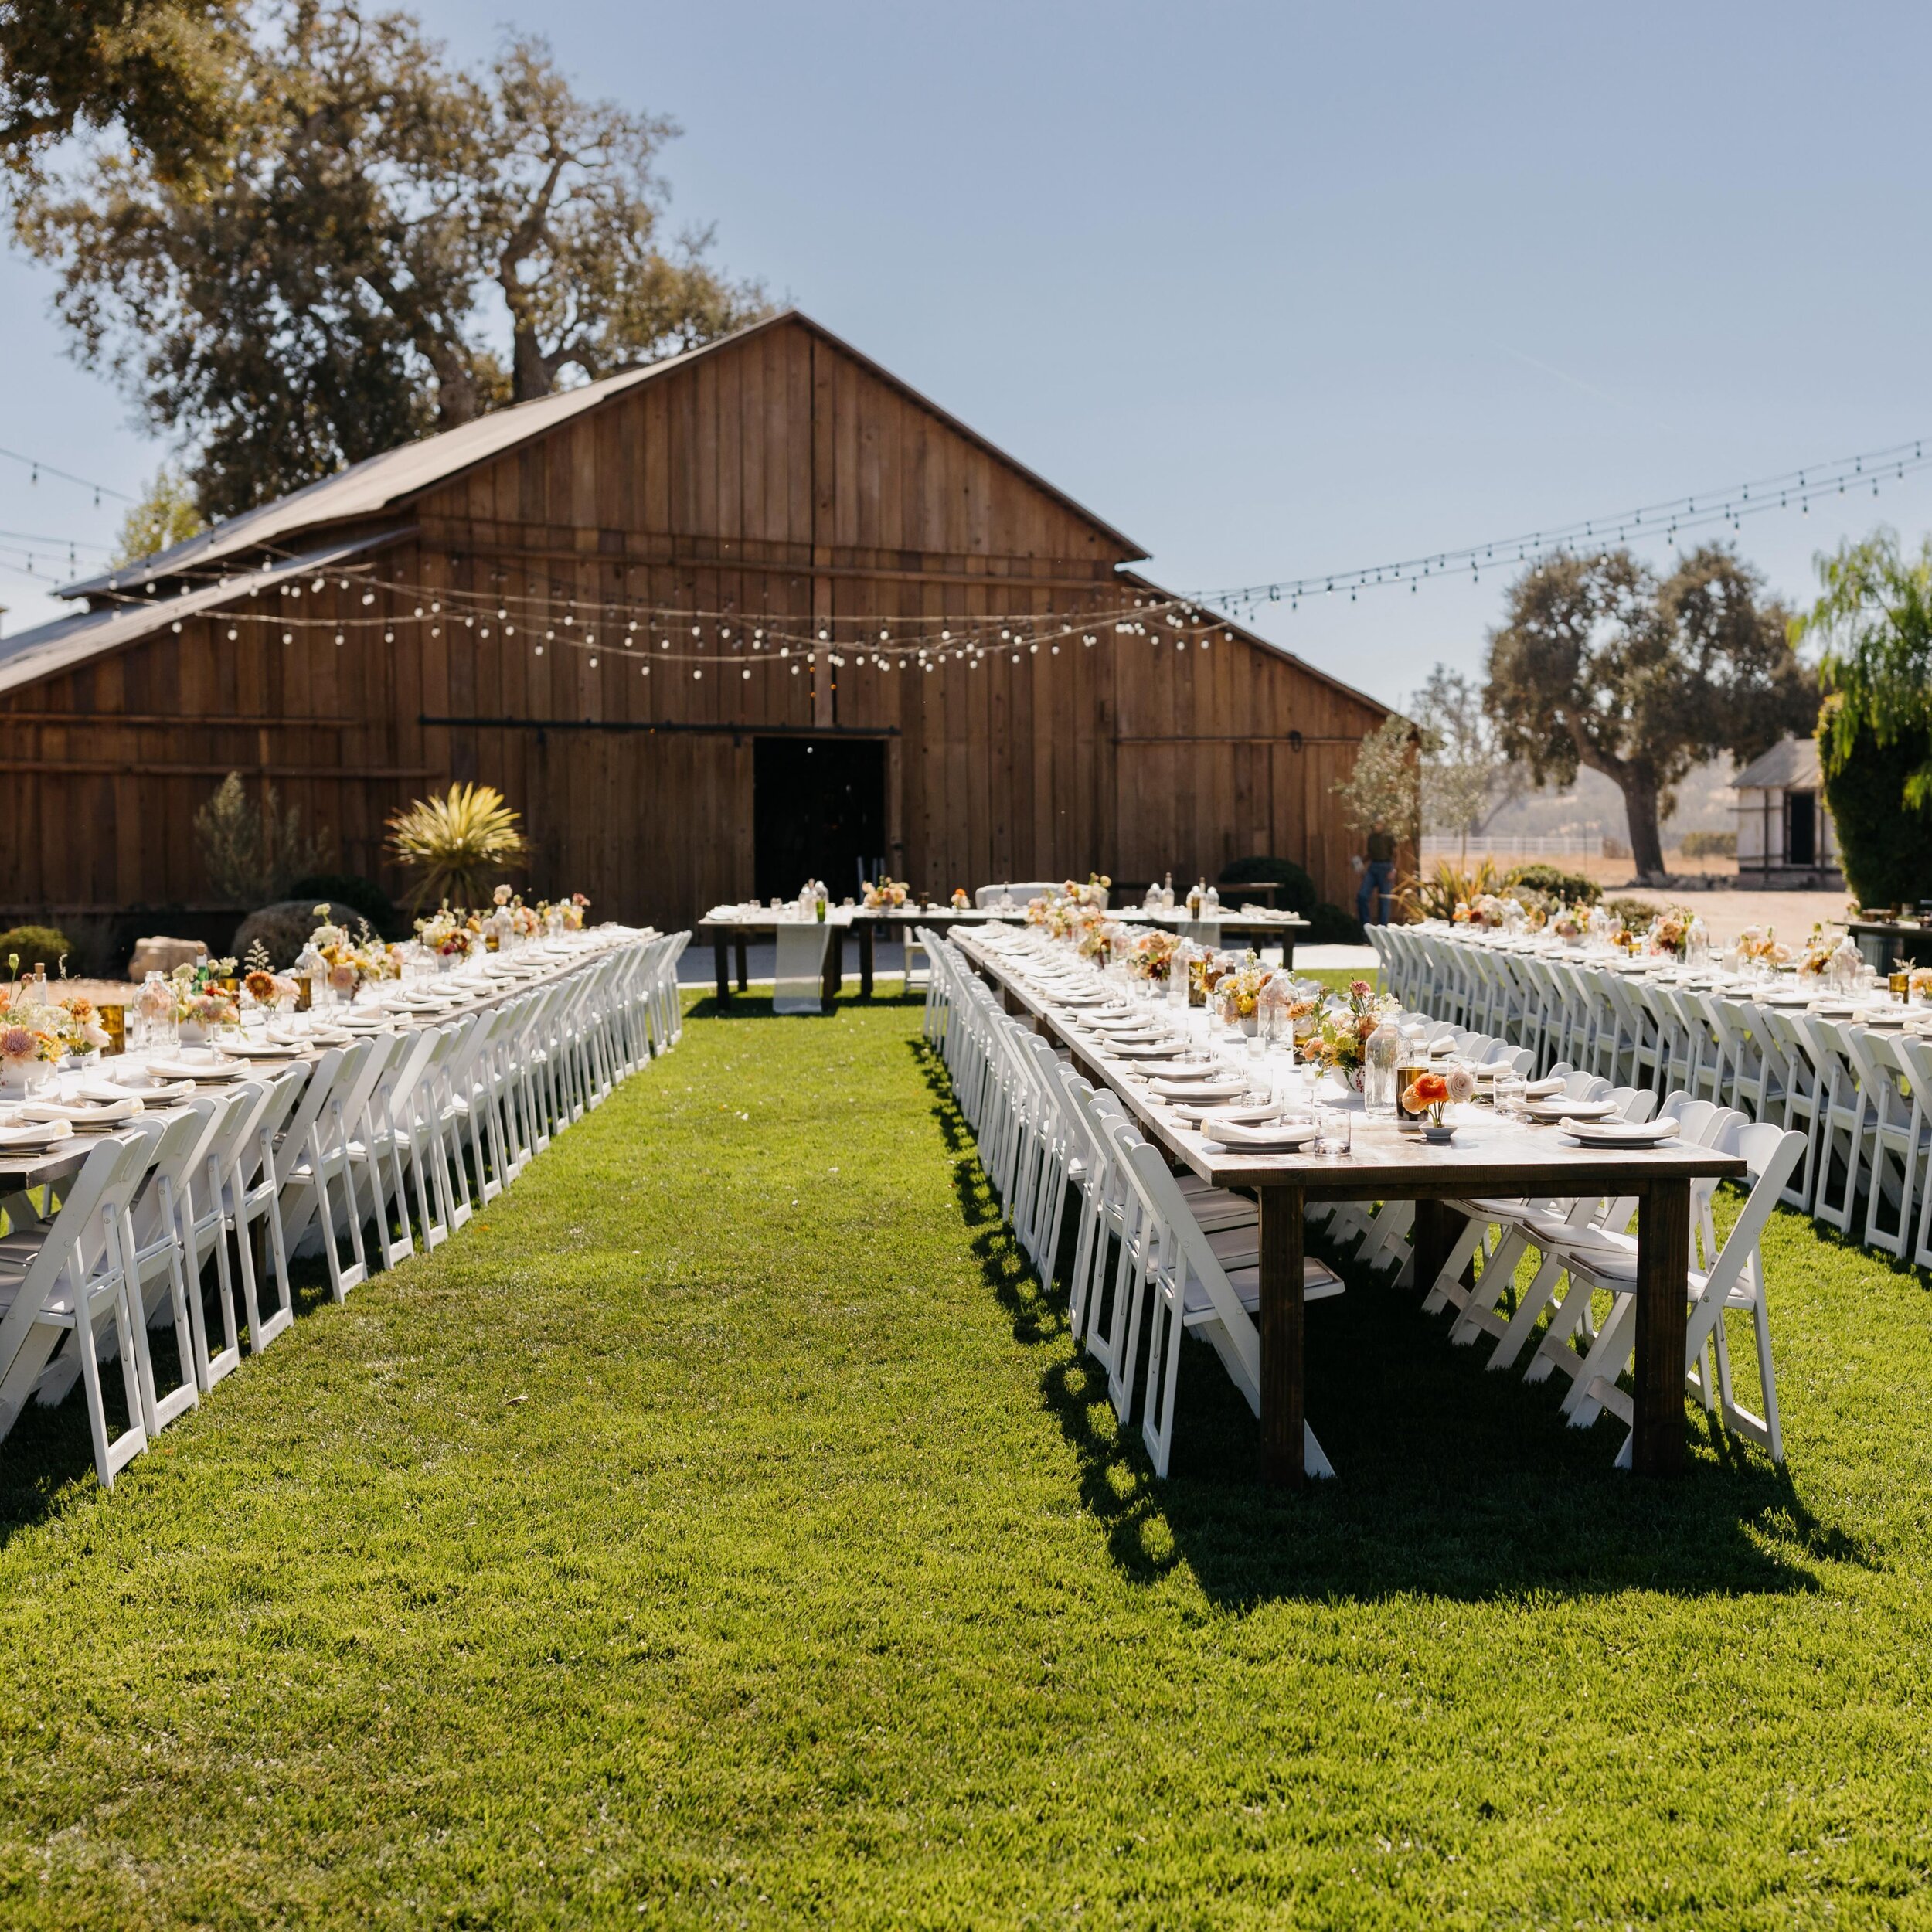 Loving the long farm style tables for dinner!! Such an elegant layout ✨